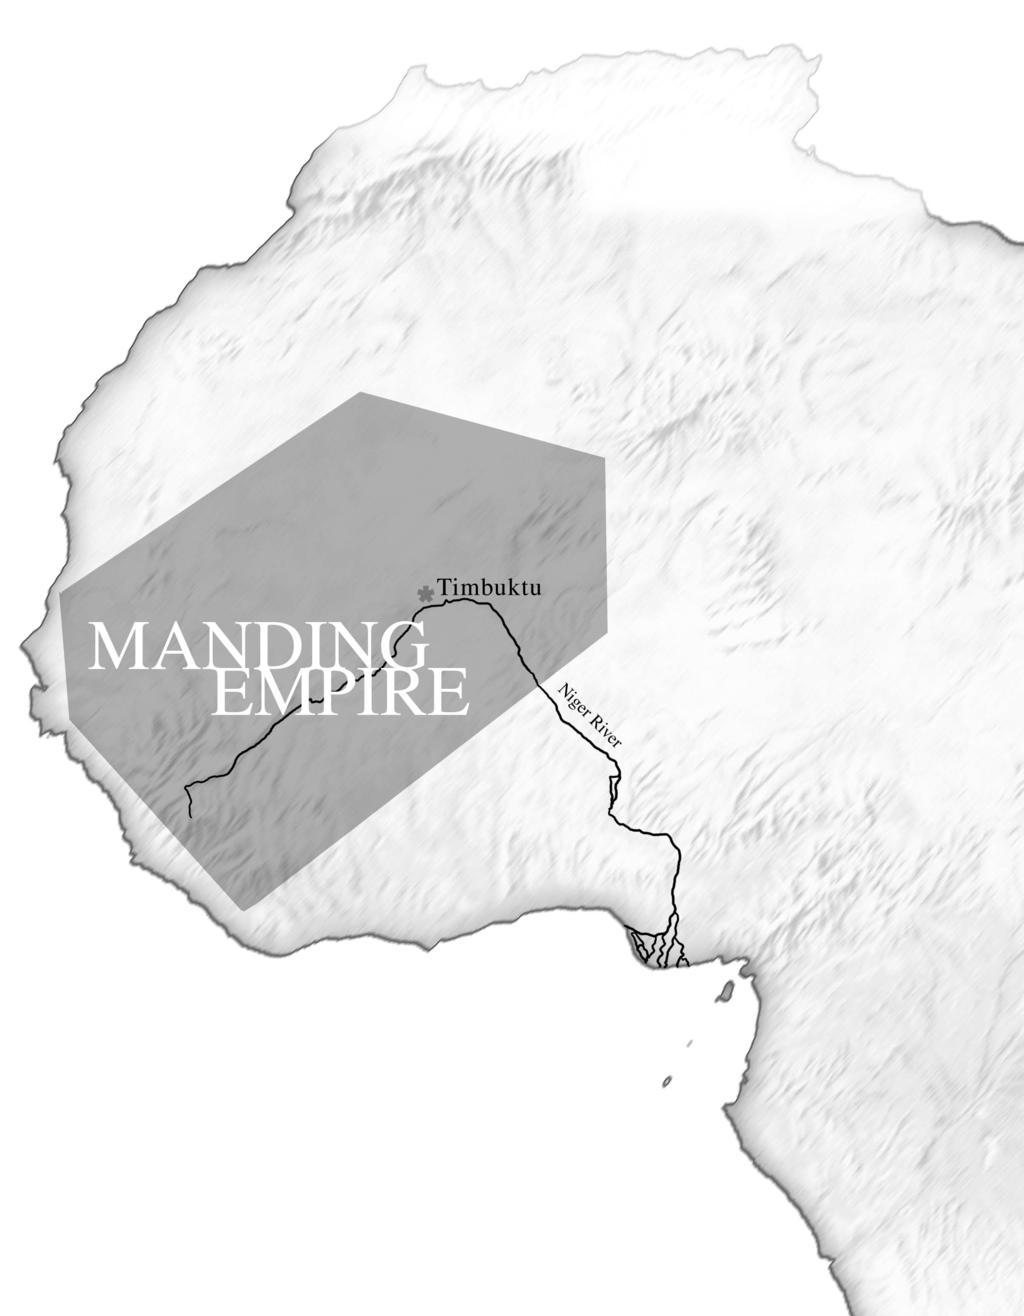 MANDING EMPIRE The great Manding or Mali Empire (as large as modern Europe) existed as early as 1000 AD, but began its rise to splendour under the heroic King Sunjata in 1235 A.D. As trade increased between North Africa and the sub-sahara, cities developed where the traders bought and sold their goods.